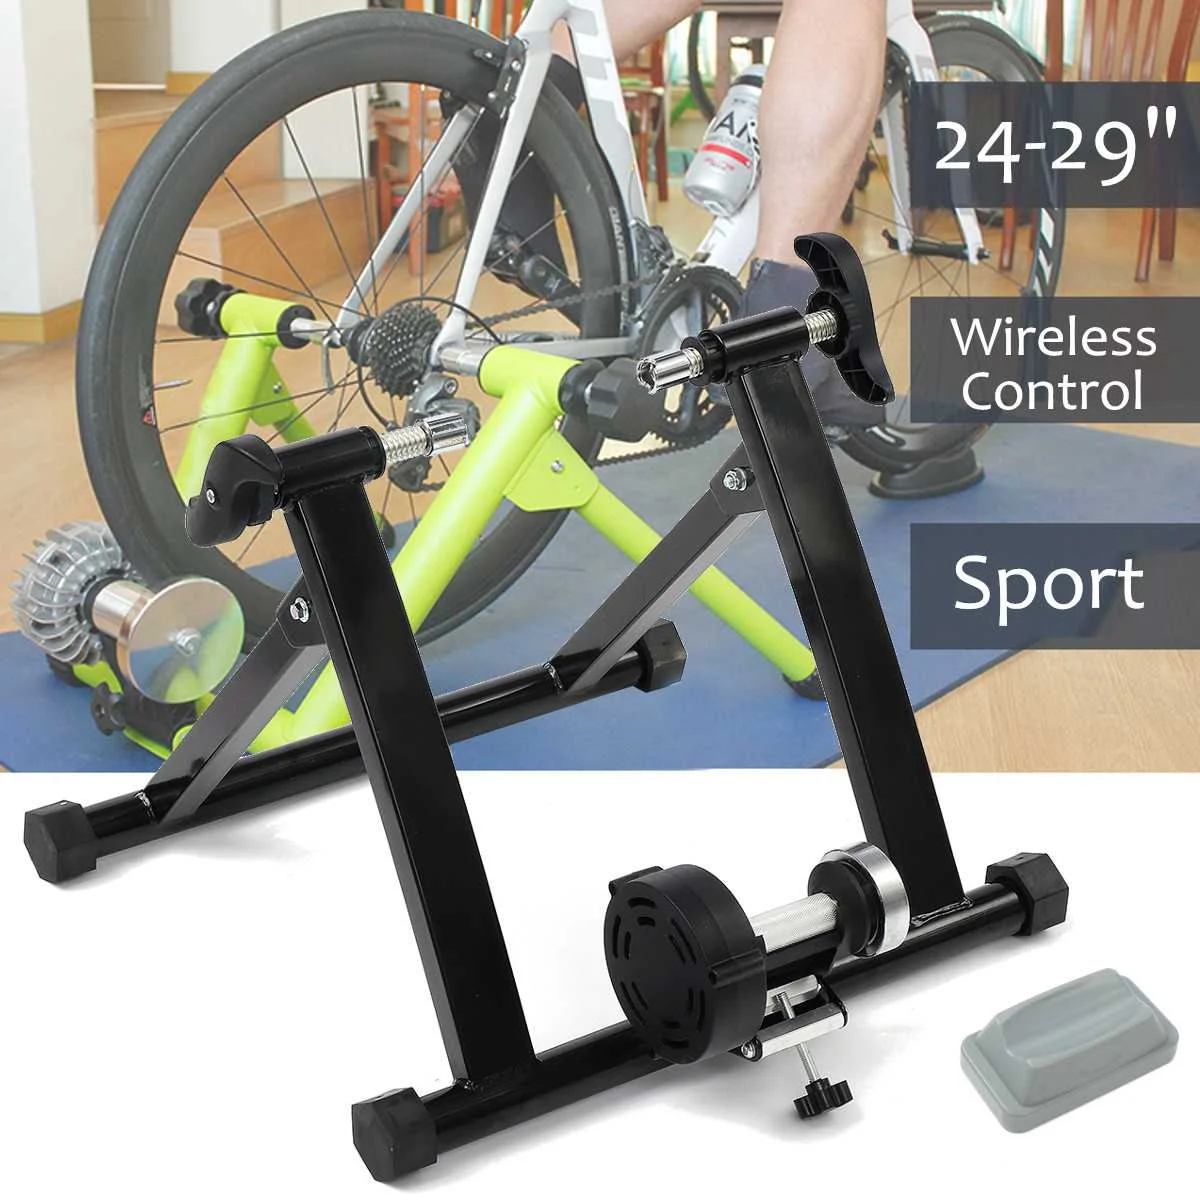 Bike Trainer Stand Magnetic Resistance Bicycle Indoor Exercise Training Black 